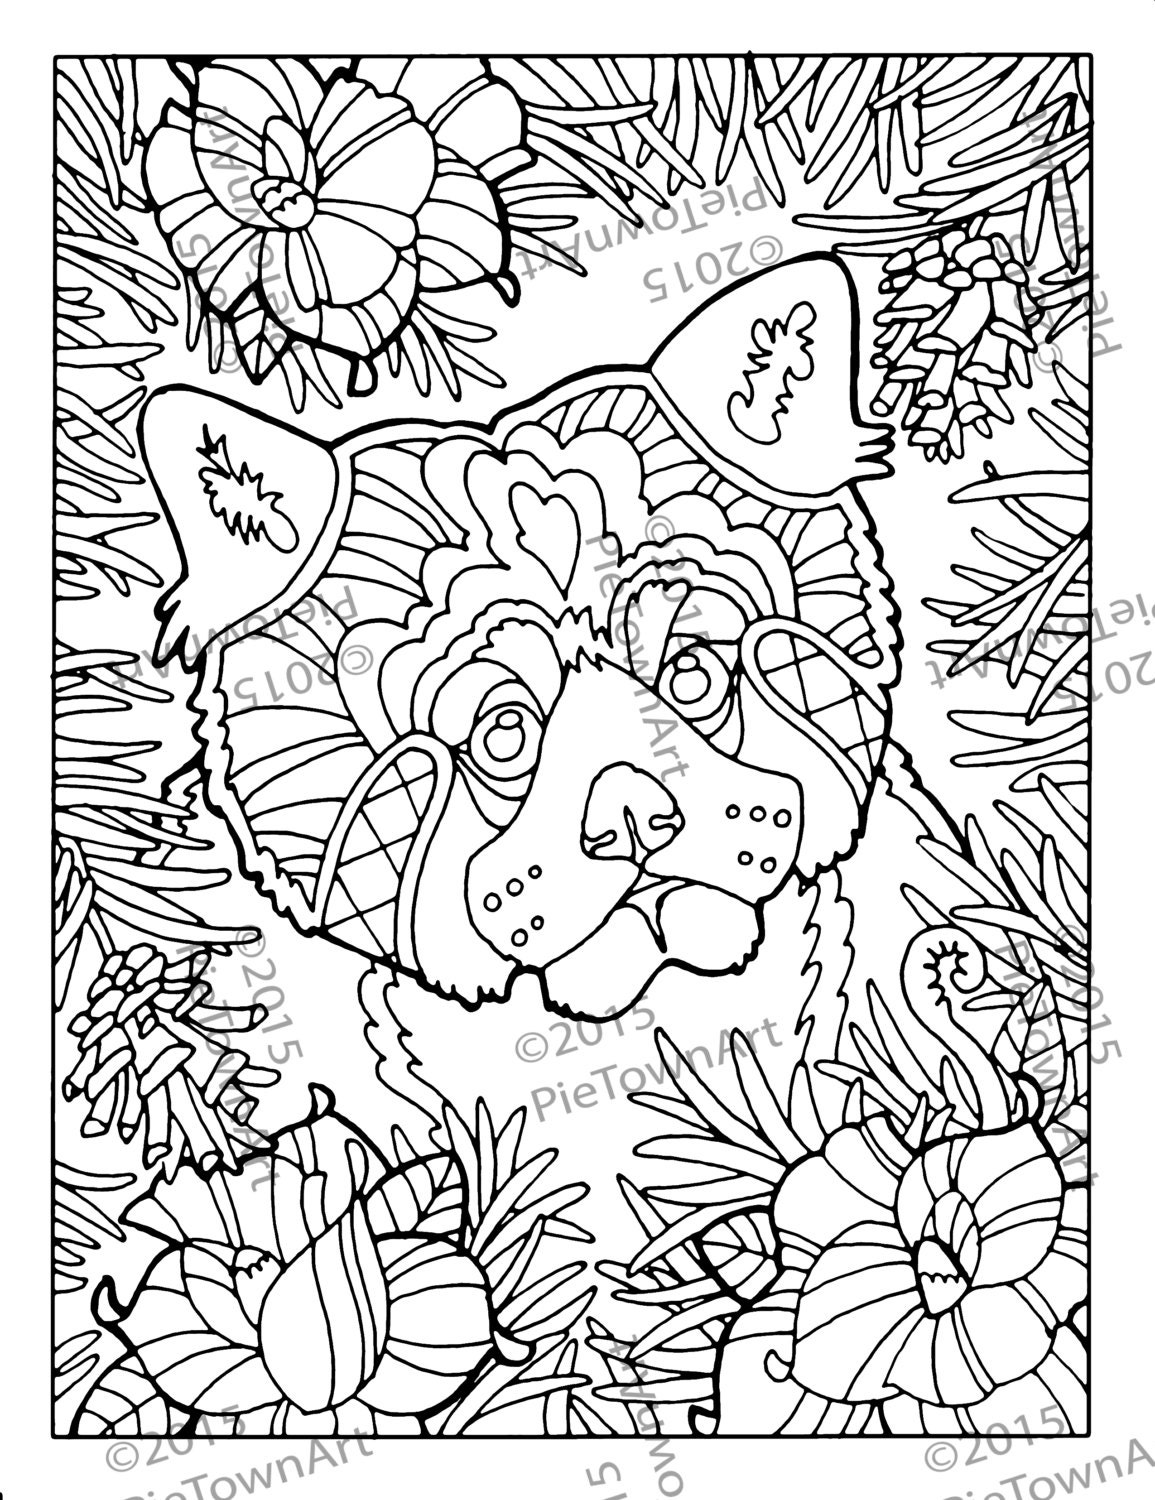 Red Panda Coloring Page 5 by PieTownArt on Etsy